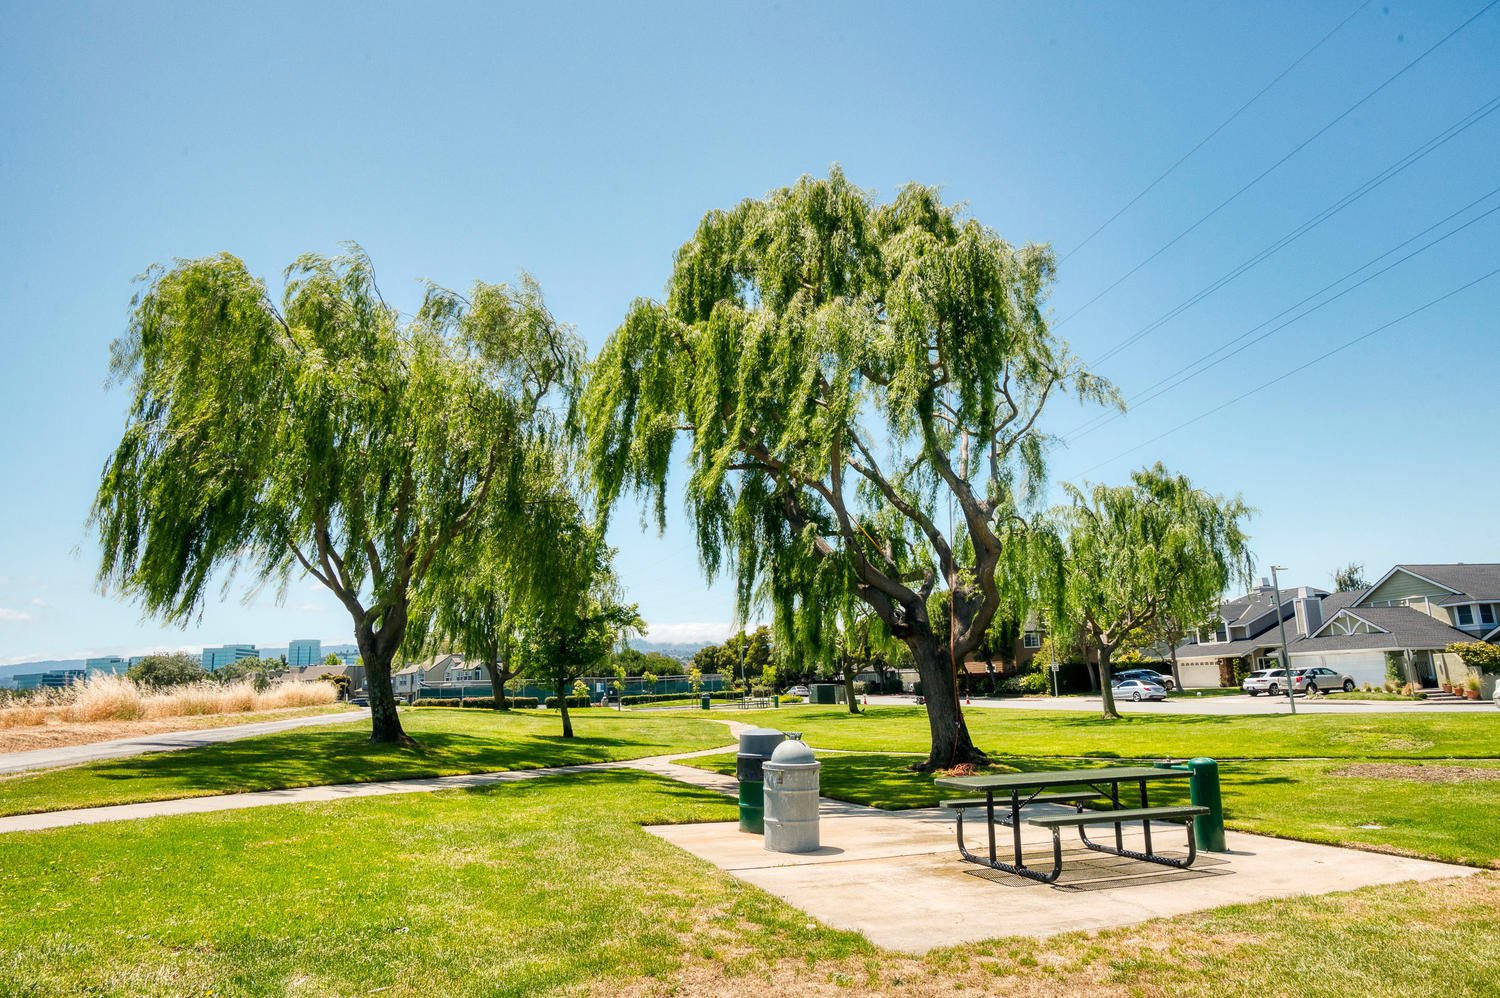 712 Gateshead Court Picnic Table in Sea Colony Neighborhood in Foster City.